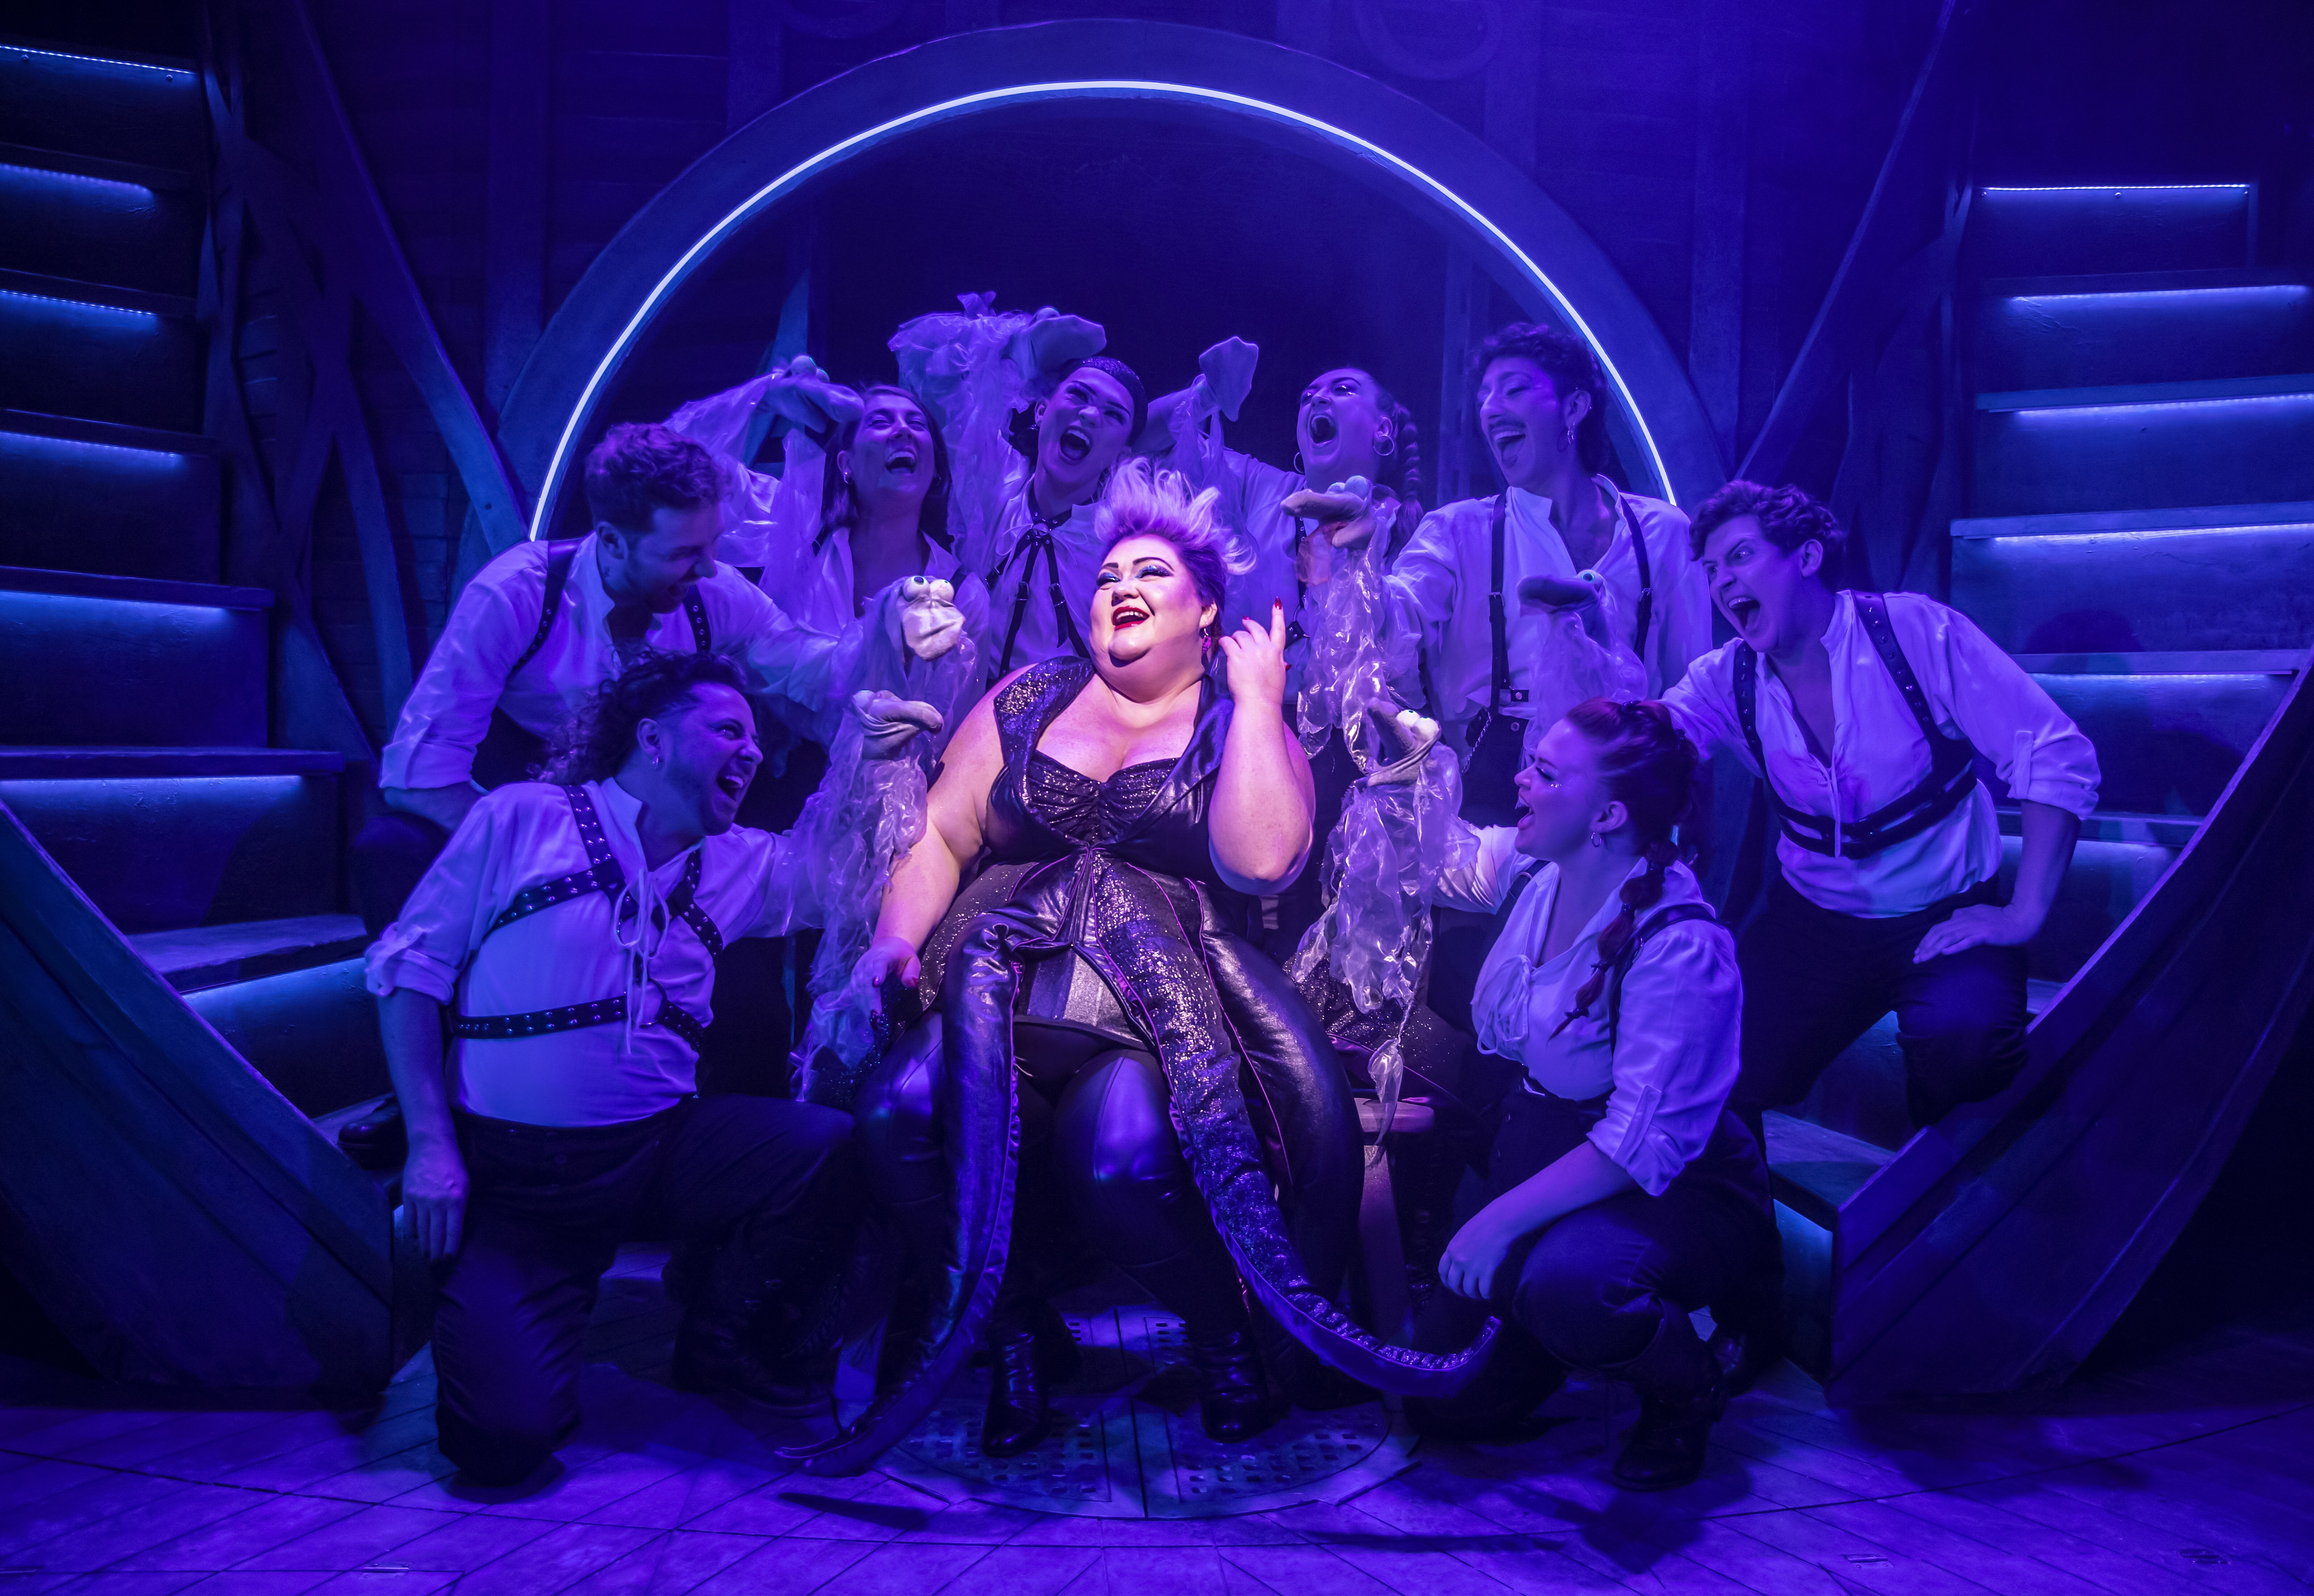 A photograph of the show Unfortunate. The character Ursula is lit up, bright against blue and purple lights, sat amidst an adoring crowd.